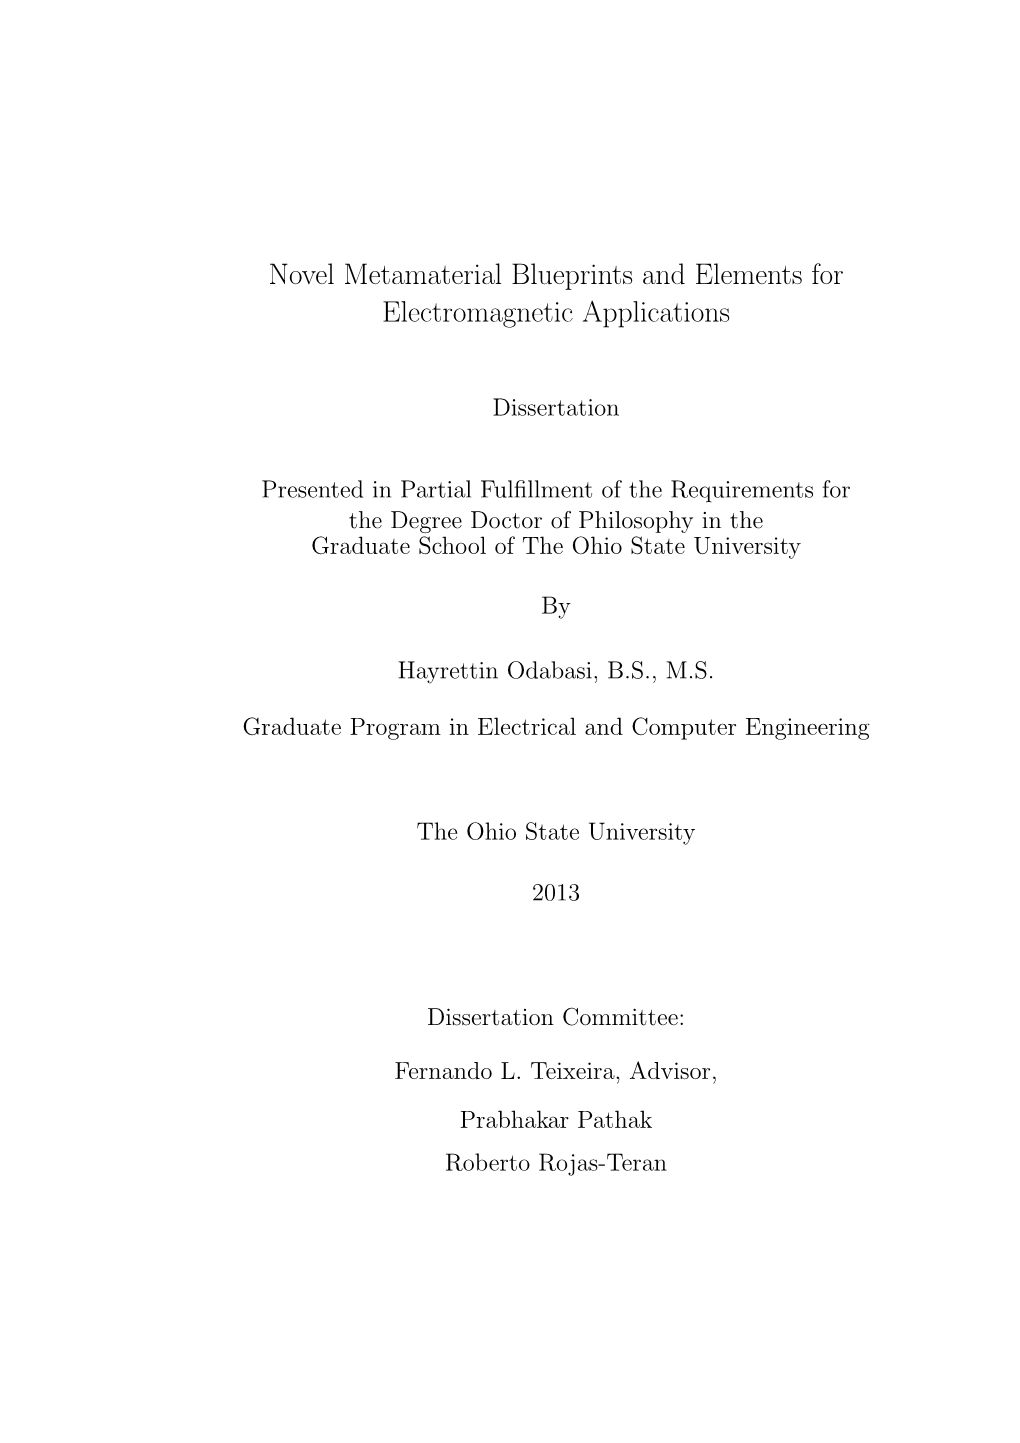 Novel Metamaterial Blueprints and Elements for Electromagnetic Applications